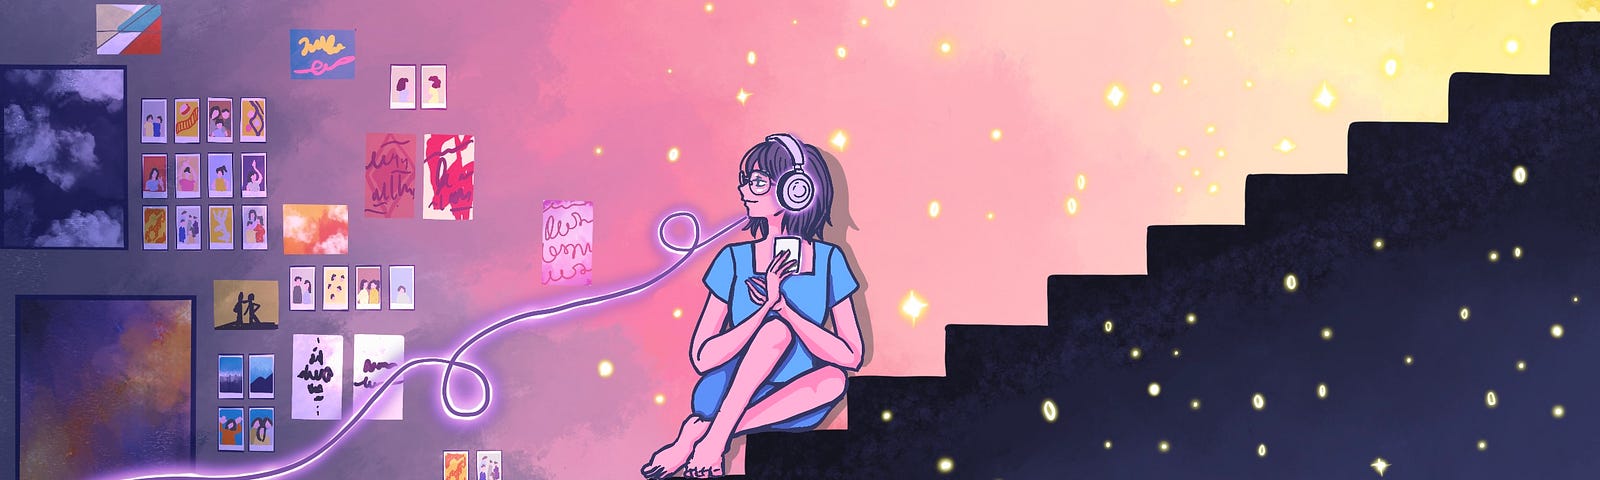 A girl sitting on the stairs wearing headphones as she looks back on the mementos, posters, and pictures from her past.